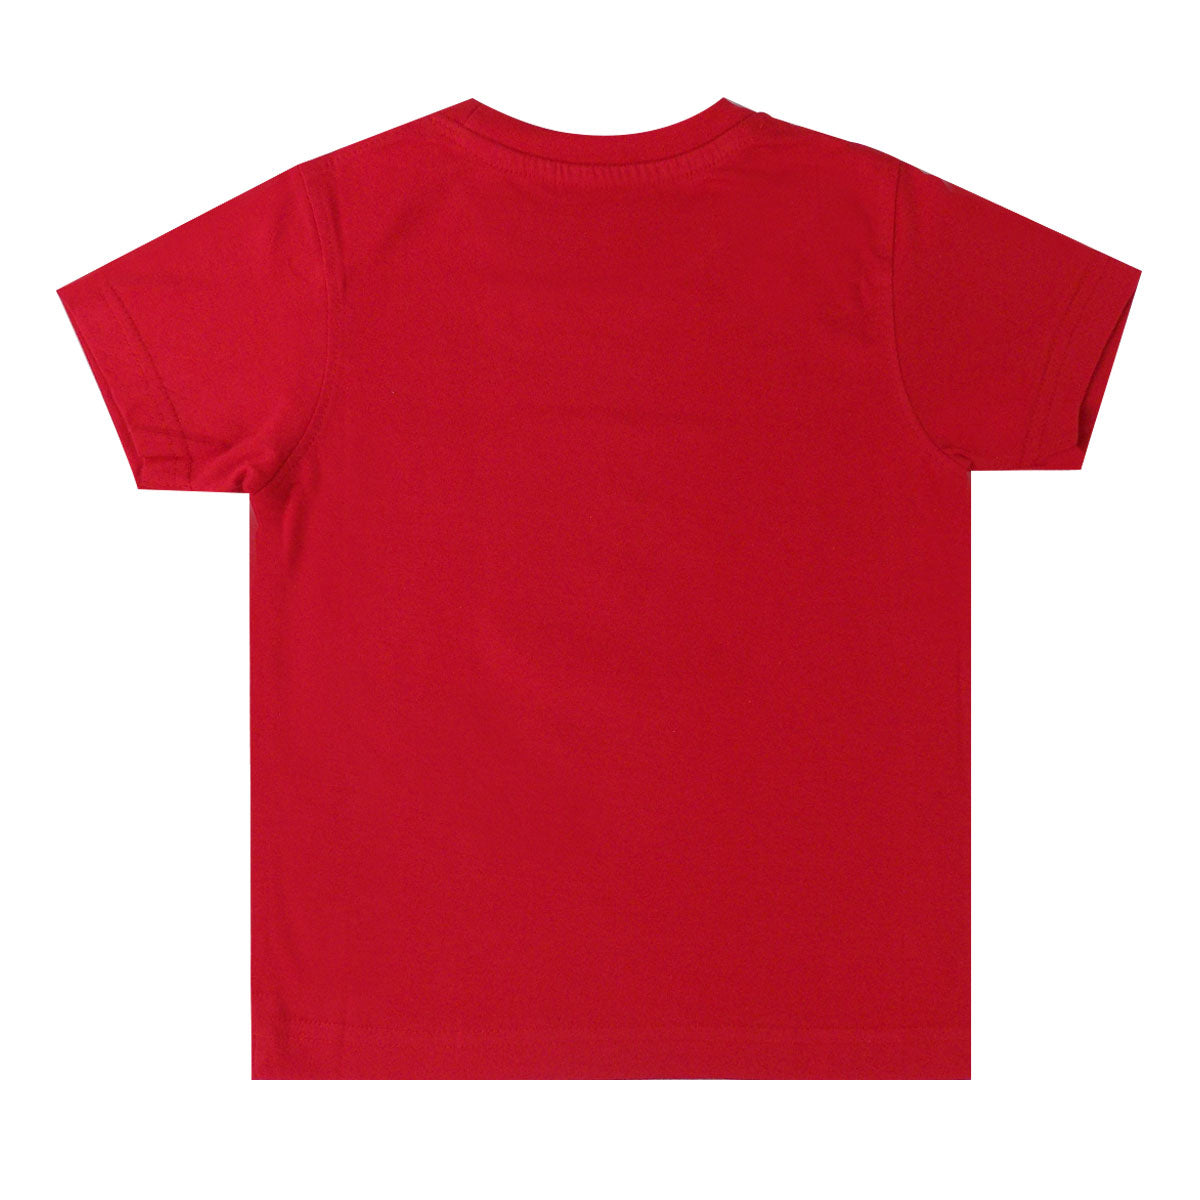 Book Worm - Premium Round Neck Cotton Tees for Kids - Red